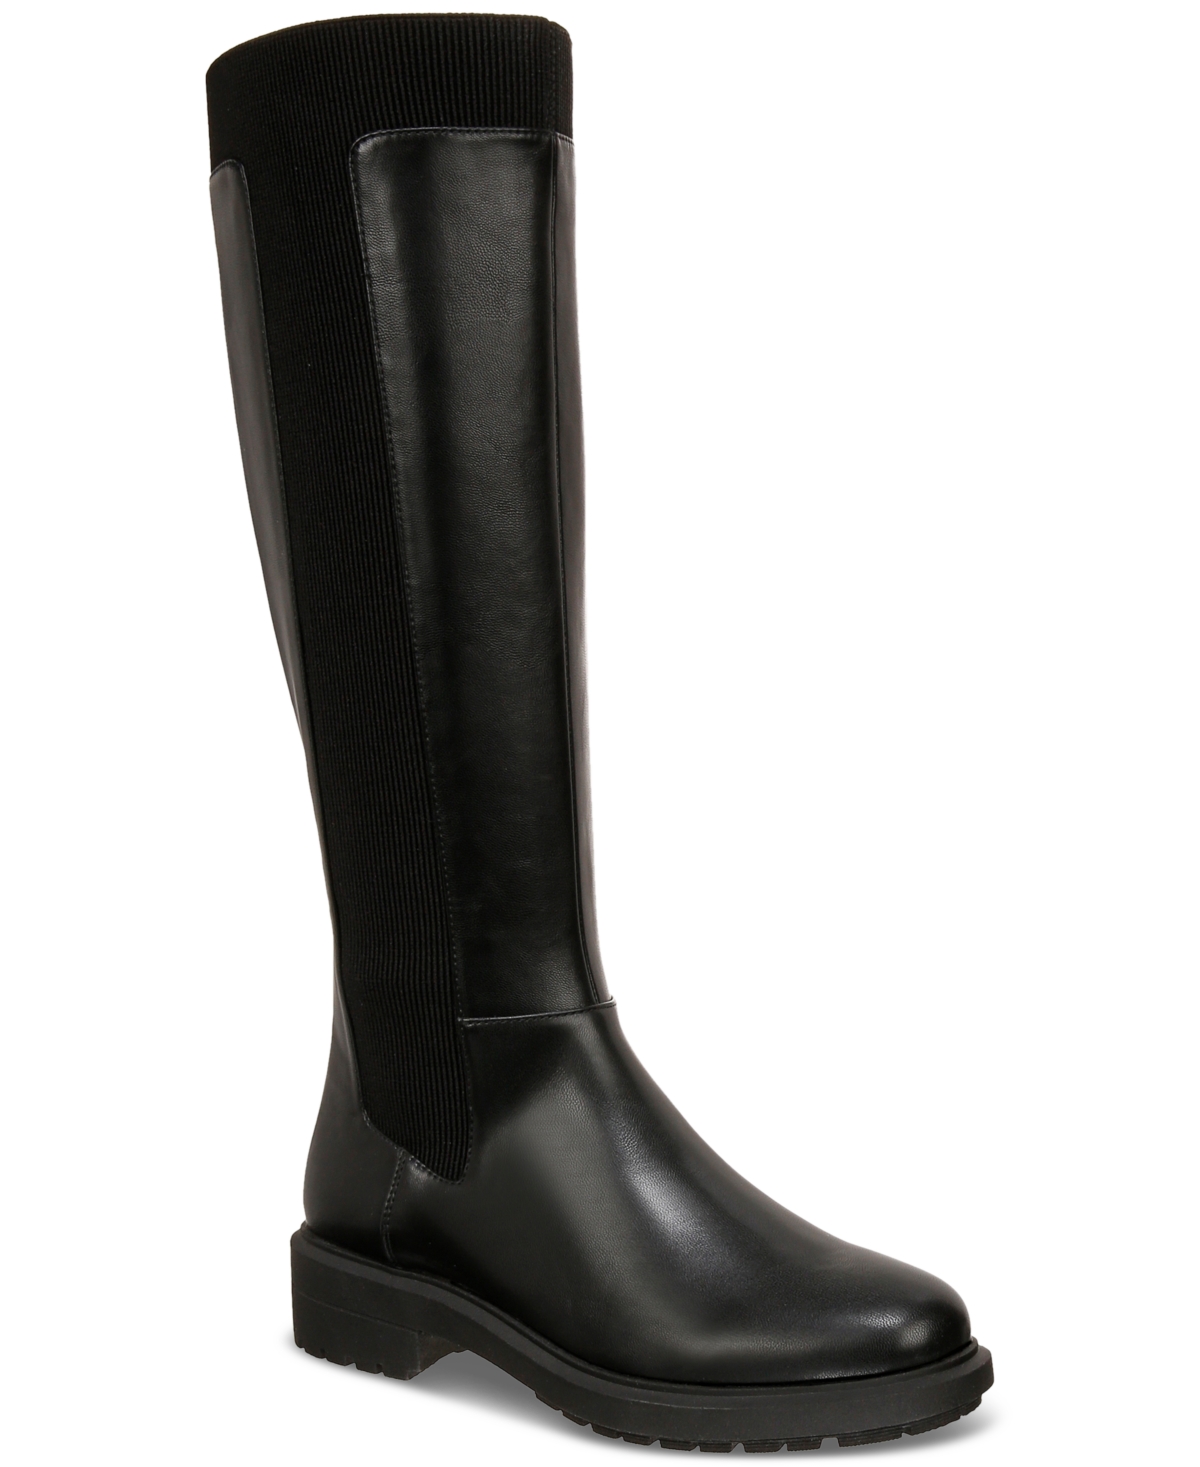 Women's Tamira Knee High Riding Boots, Created for Macy's - Black Smooth